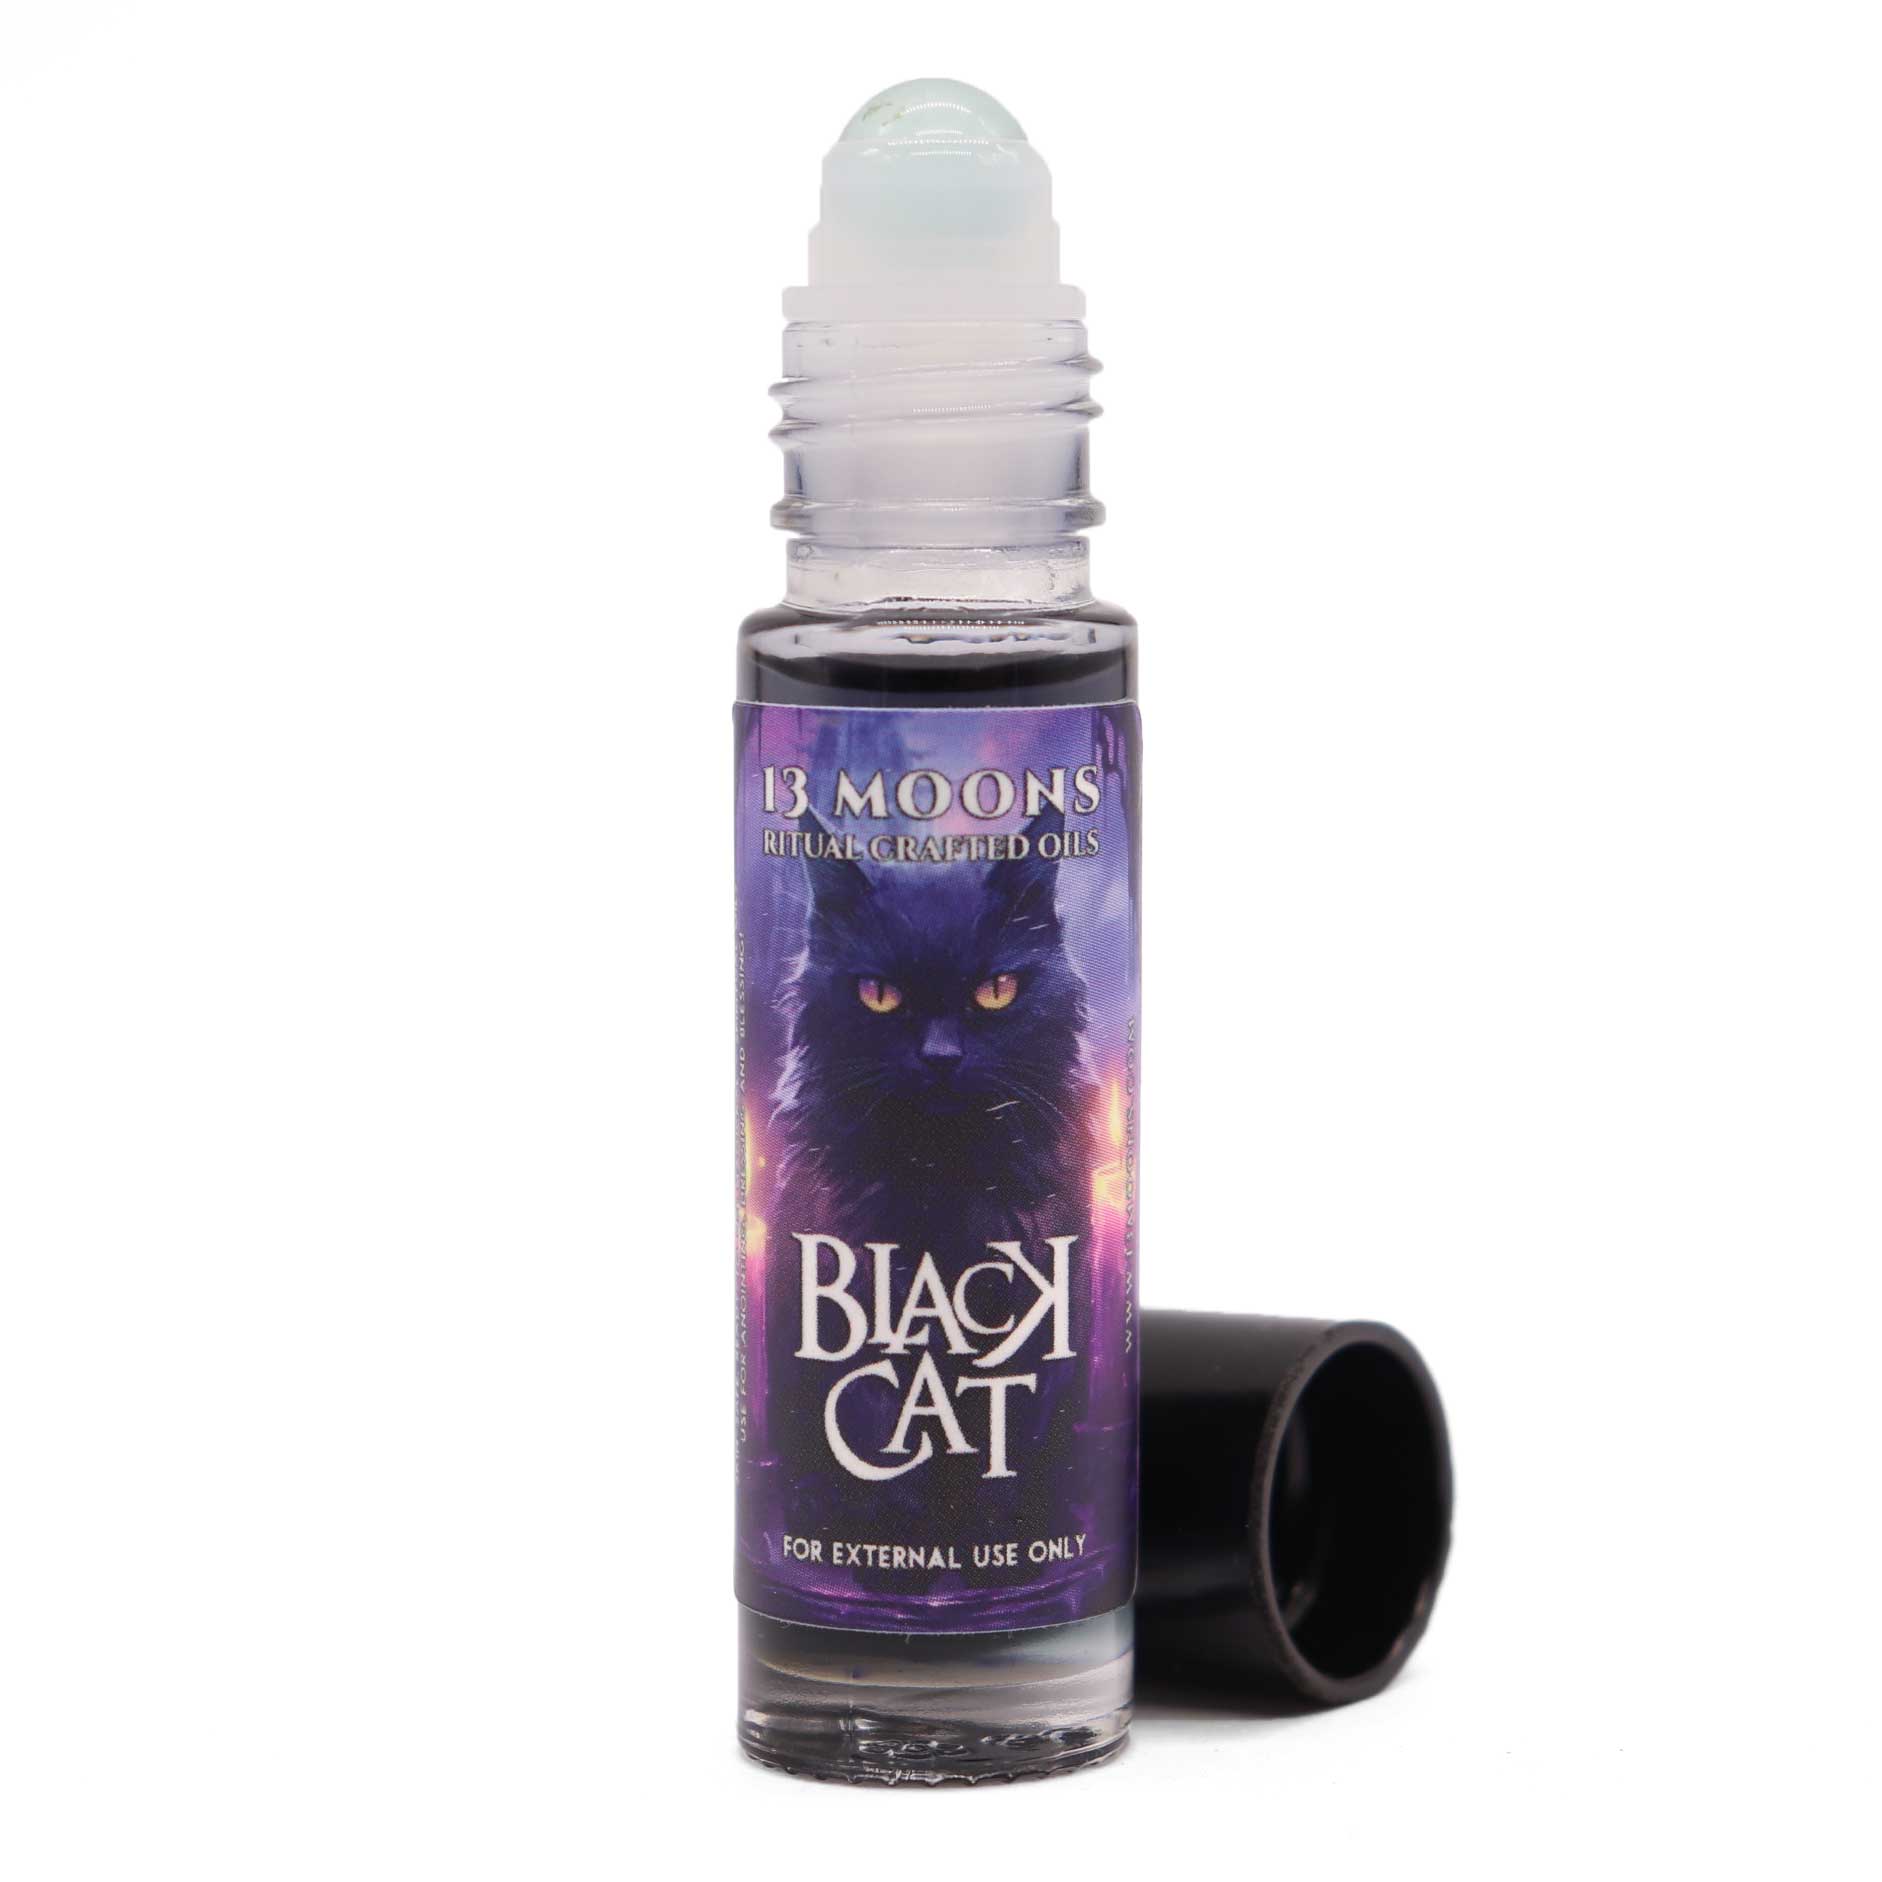 Black Cat Ritual Crafted Oil by 13 Moons - 13 Moons